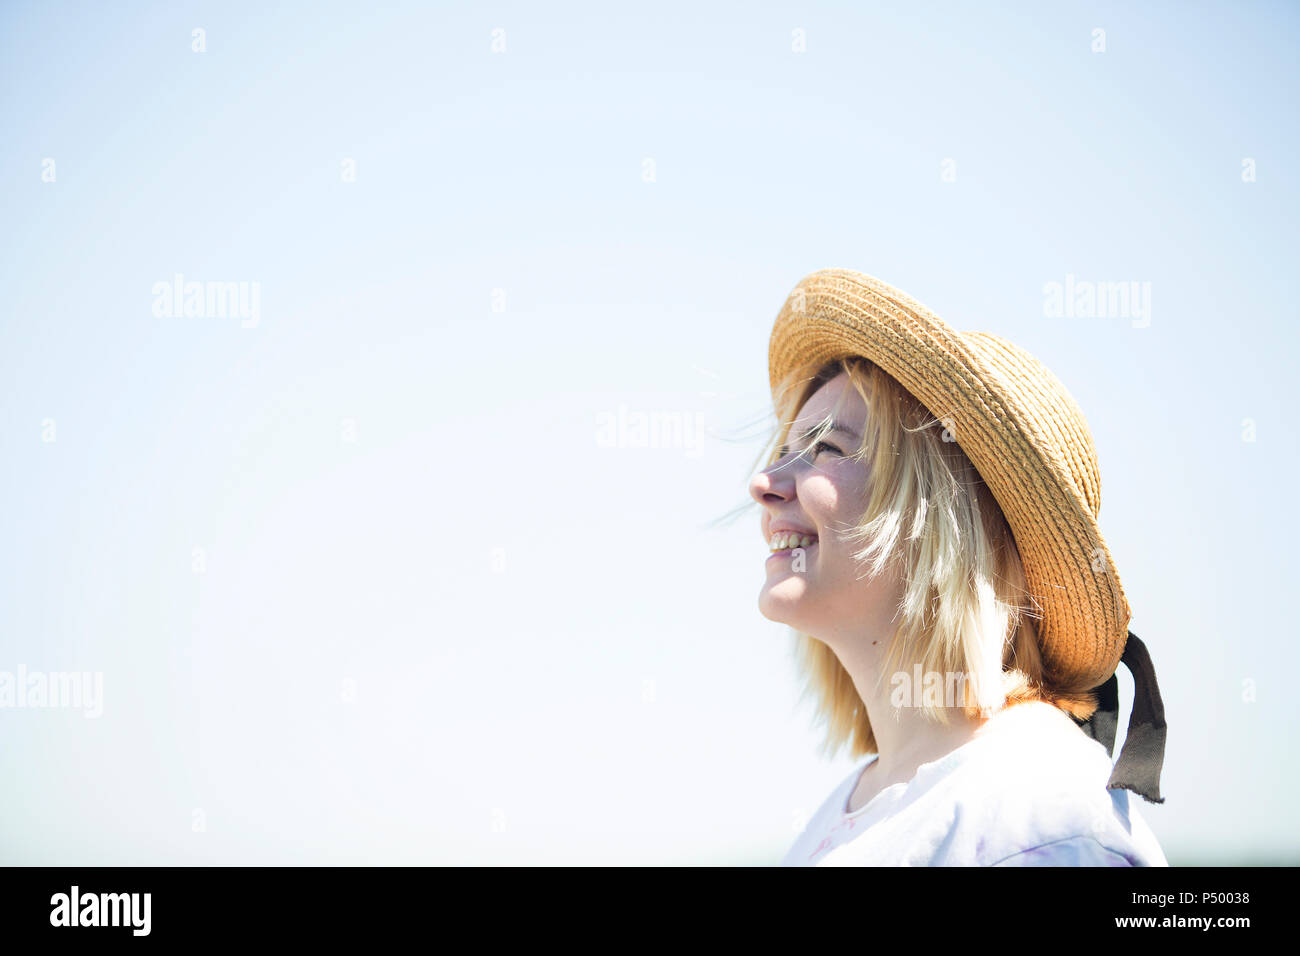 Young smiling woman with sun hat looking up, blue sky, copy space Stock Photo